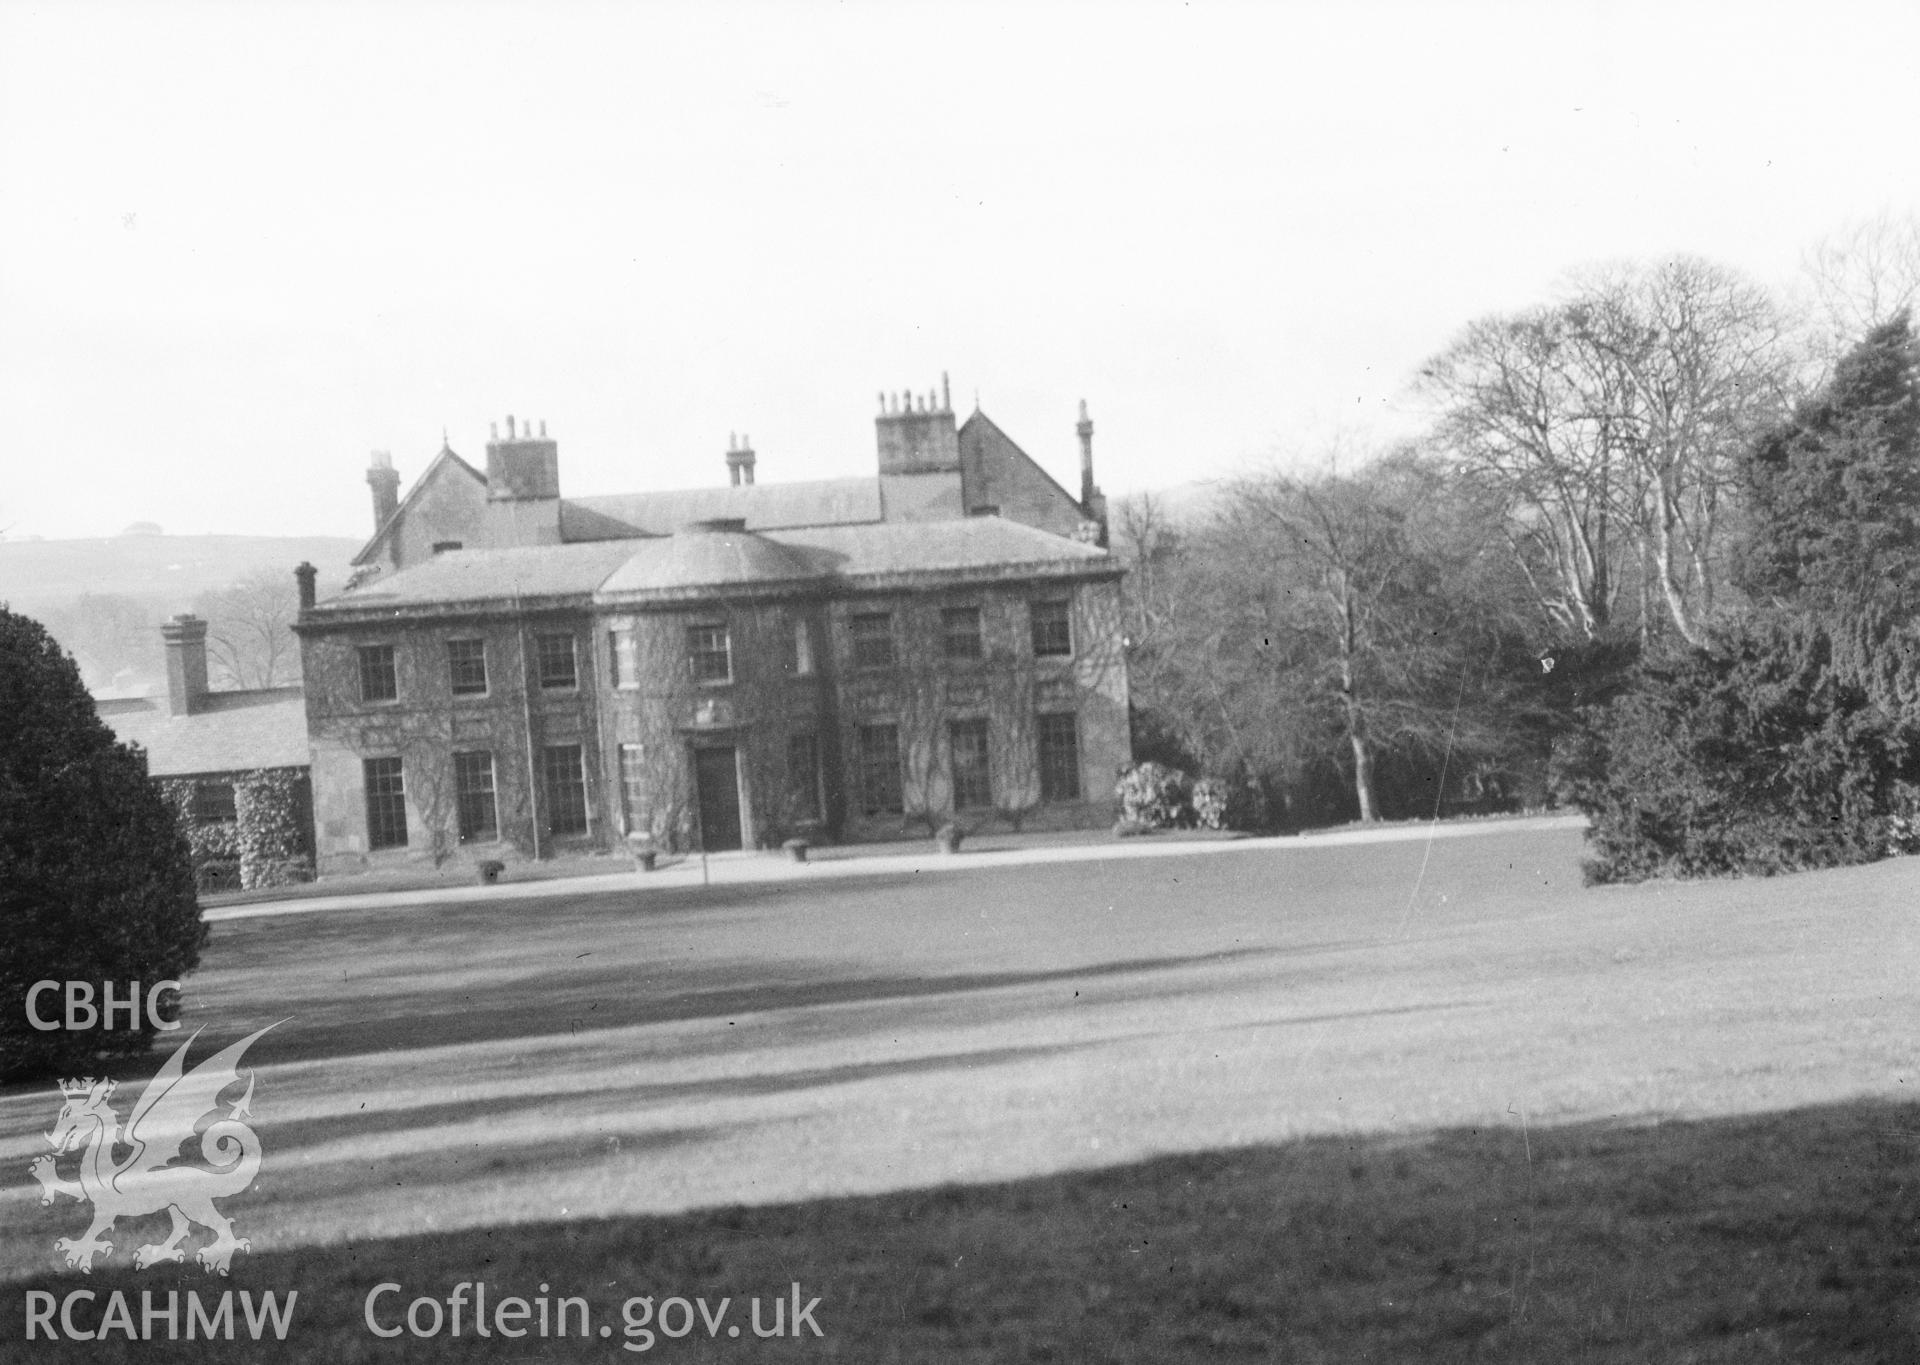 Digital copy of a black and white negative showing St Asaph Bishop's Palace.